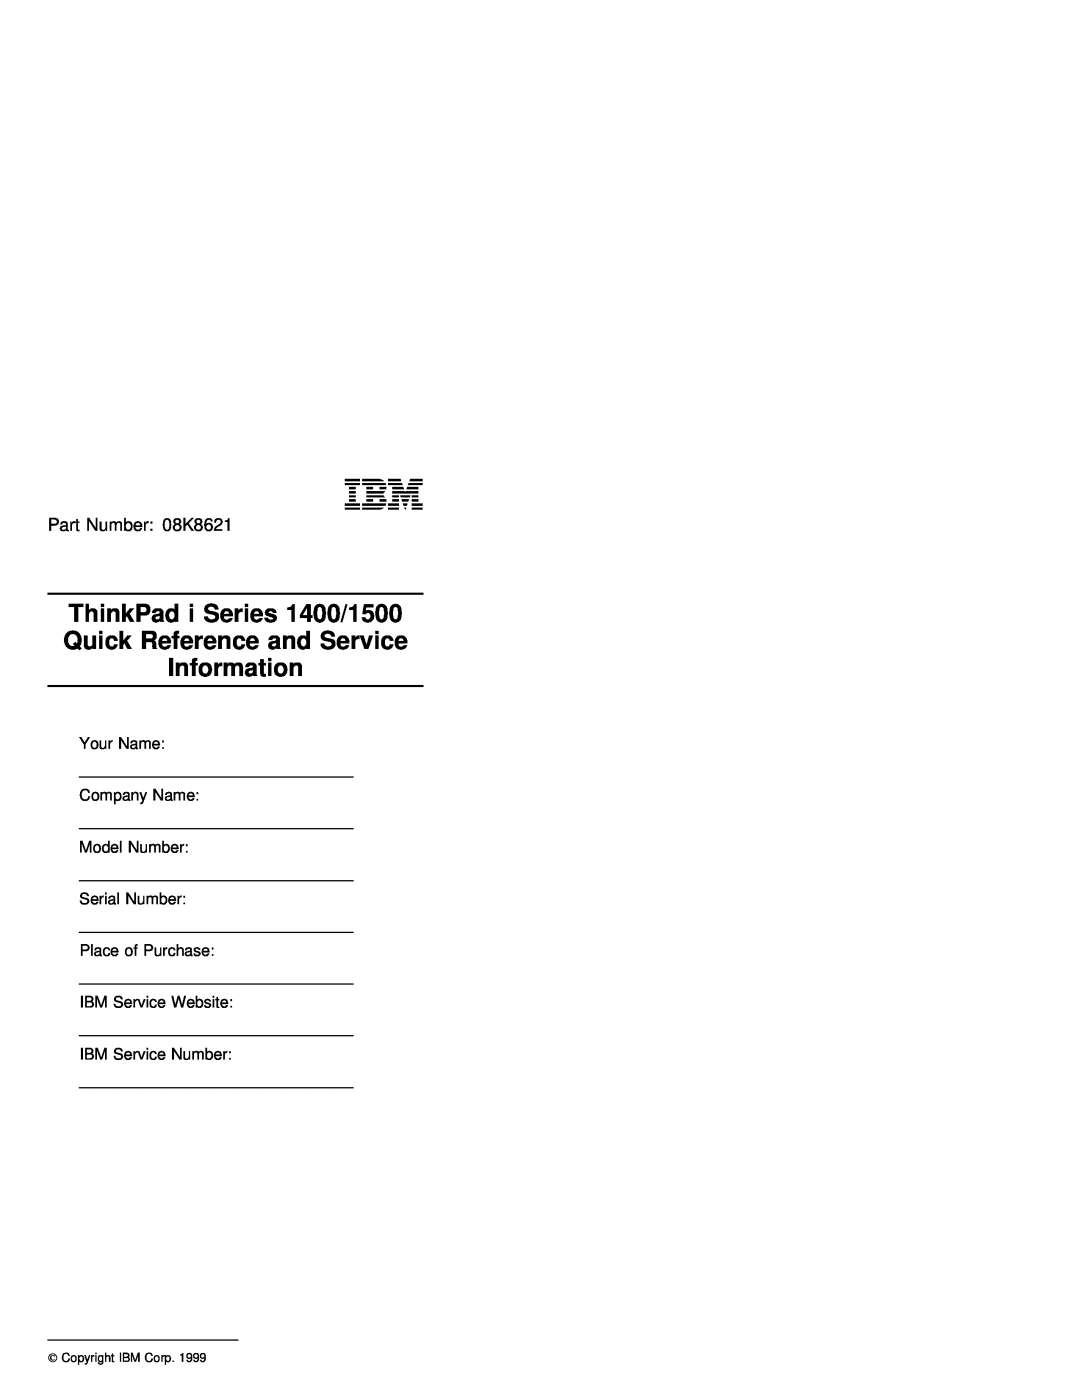 IBM 1400 i Series manual ThinkPad i Series 1400/1500 Quick Reference and Service Information, Part Number 08K8621 